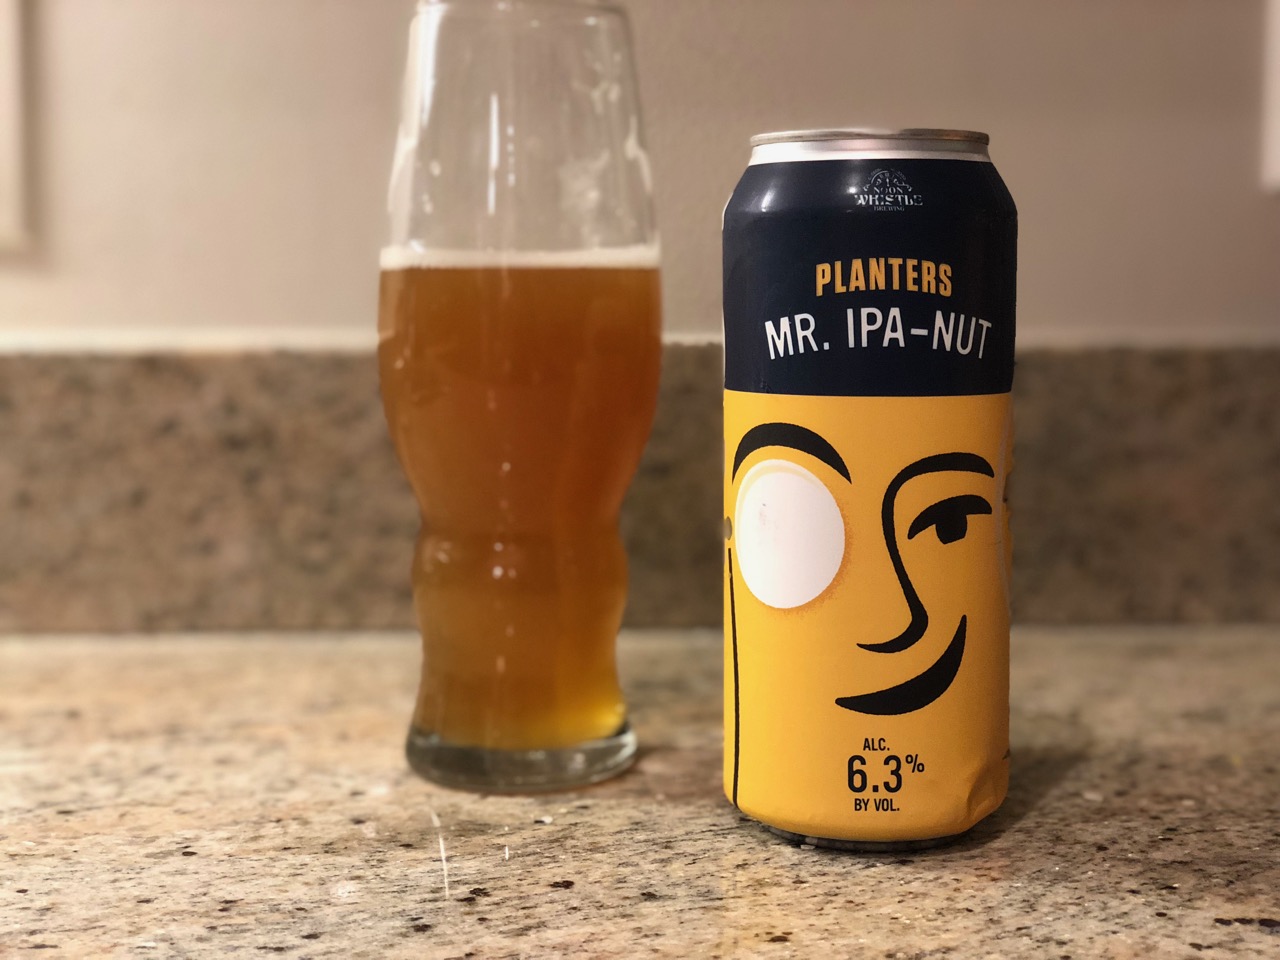 Noon Whistle Collaborates with Planters on Mr. IPA-Nut